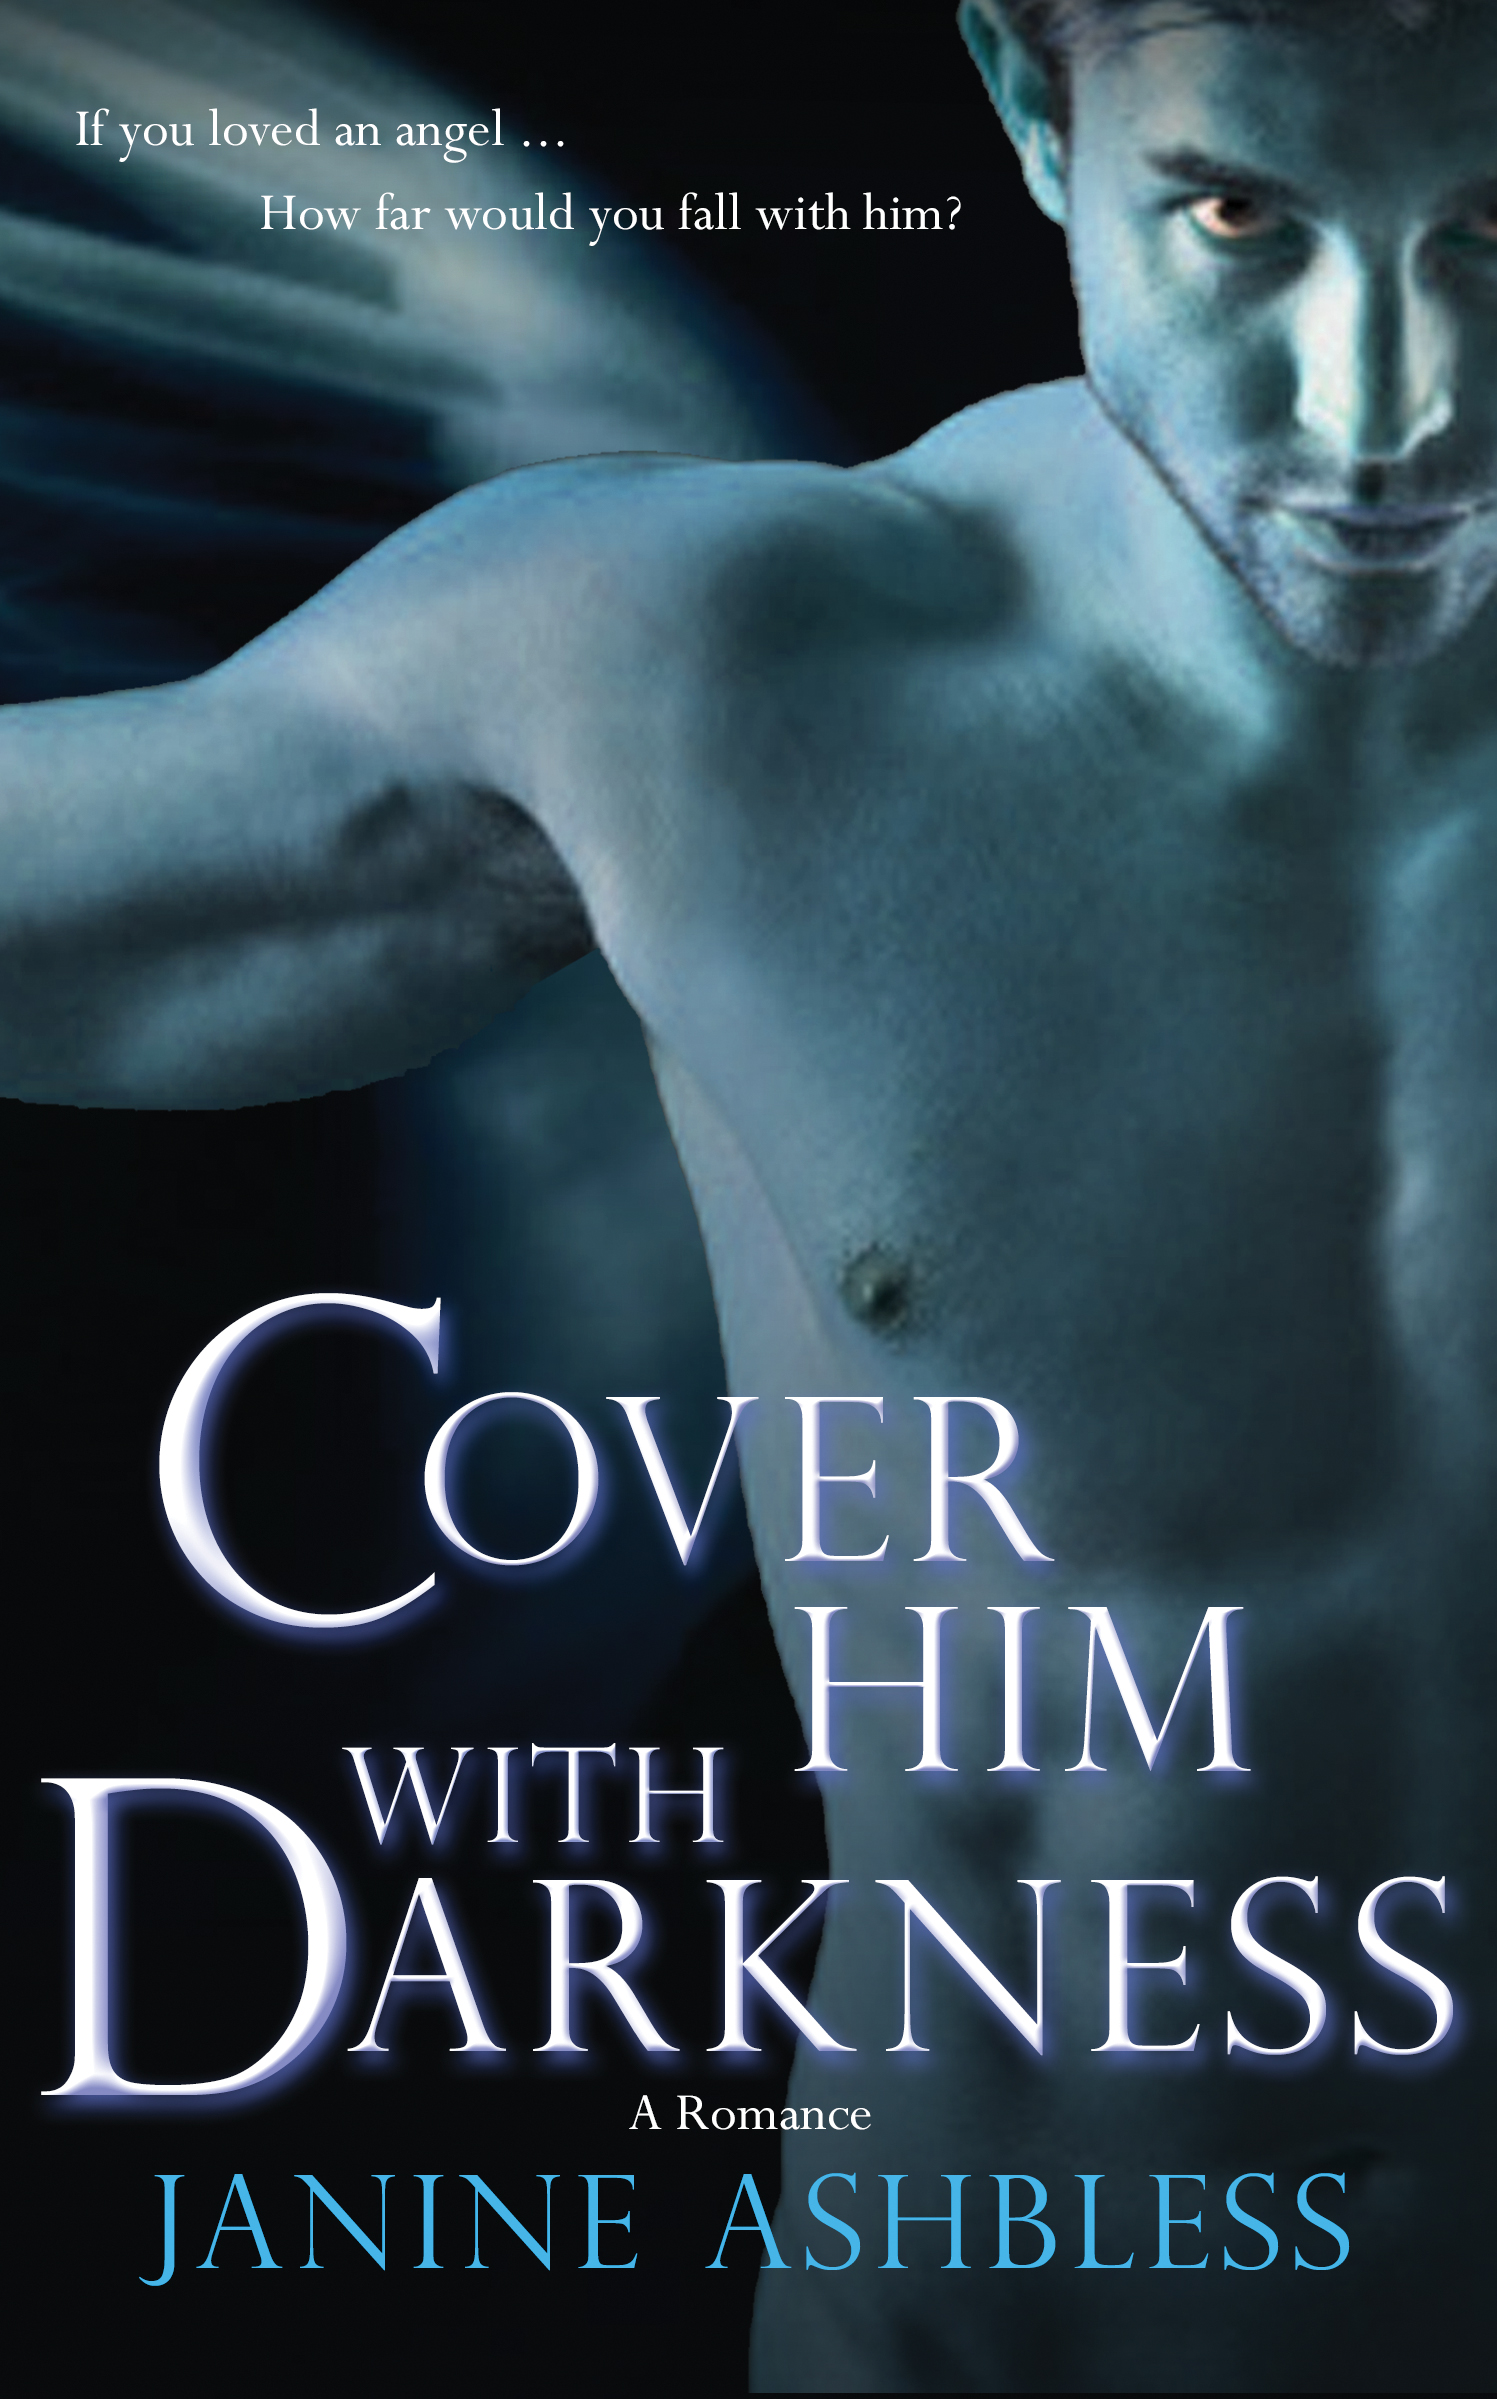 Cover him with Darkness cover